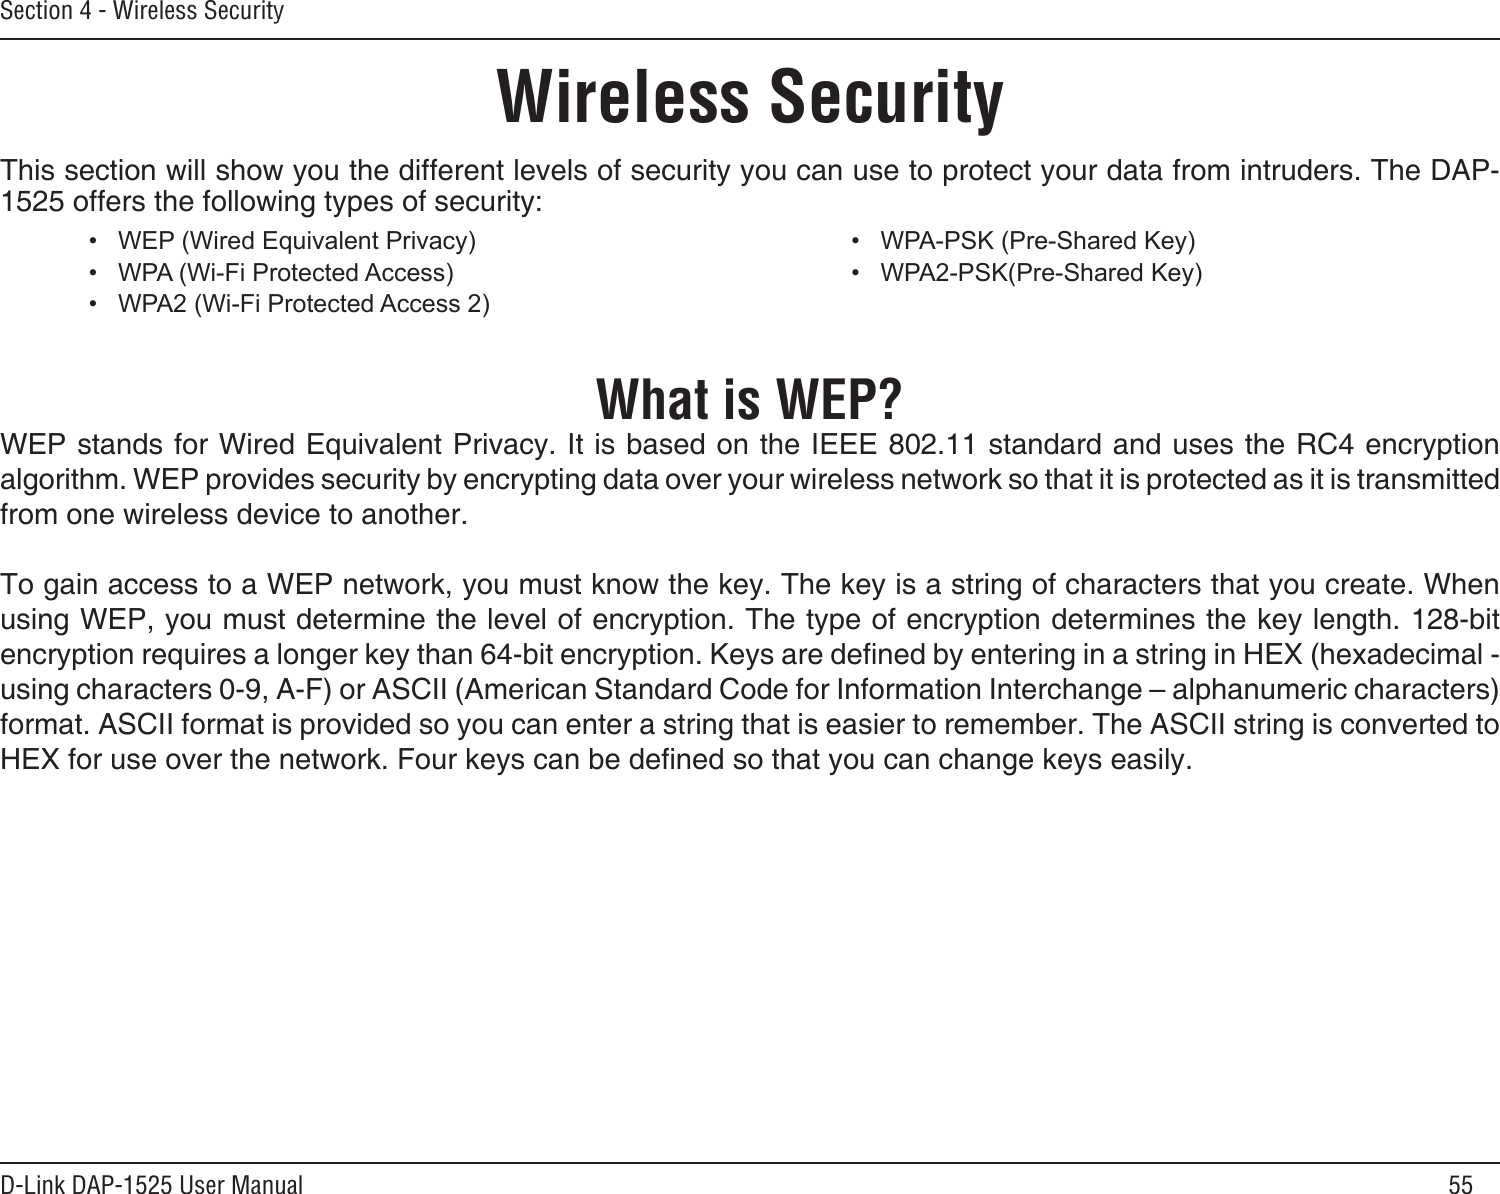 55D-Link DAP-1525 User ManualSection 4 - Wireless SecurityWireless SecurityThis section will show you the different levels of security you can use to protect your data from intruders. The DAP-1525 offers the following types of security:What is WEP?WEP stands for Wired Equivalent Privacy. It is based on the IEEE 802.11 standard and uses the RC4 encryption algorithm. WEP provides security by encrypting data over your wireless network so that it is protected as it is transmitted from one wireless device to another. To gain access to a WEP network, you must know the key. The key is a string of characters that you create. When using WEP, you must determine the level of encryption. The type of encryption determines the key length. 128-bit encryption requires a longer key than 64-bit encryption. Keys are dened by entering in a string in HEX (hexadecimal - using characters 0-9, A-F) or ASCII (American Standard Code for Information Interchange – alphanumeric characters) format. ASCII format is provided so you can enter a string that is easier to remember. The ASCII string is converted to HEX for use over the network. Four keys can be dened so that you can change keys easily.• WEP(WiredEquivalentPrivacy)• WPA(Wi-FiProtectedAccess)• WPA2(Wi-FiProtectedAccess2)• WPA-PSK(Pre-SharedKey)• WPA2-PSK(Pre-SharedKey)